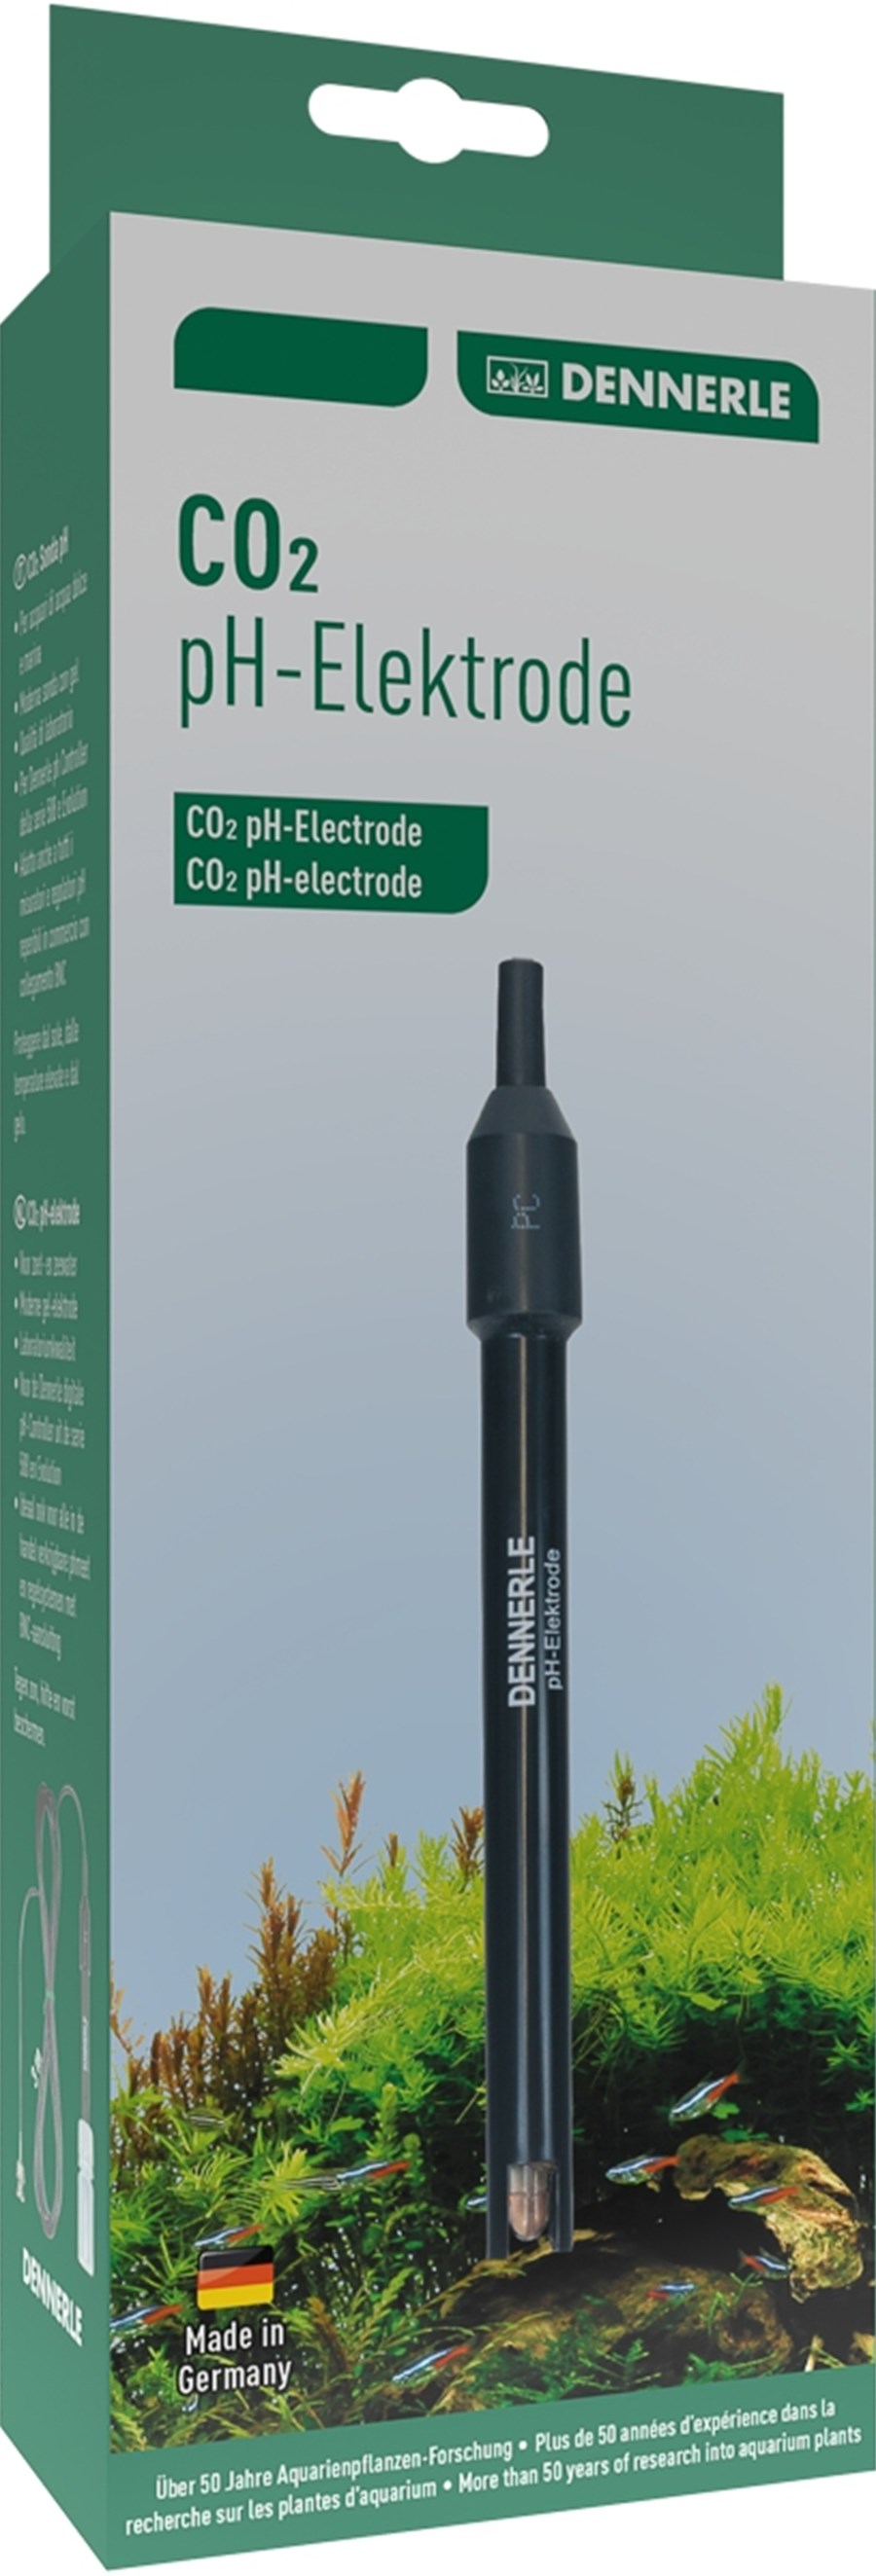 CO2 pH electrode Dennerle